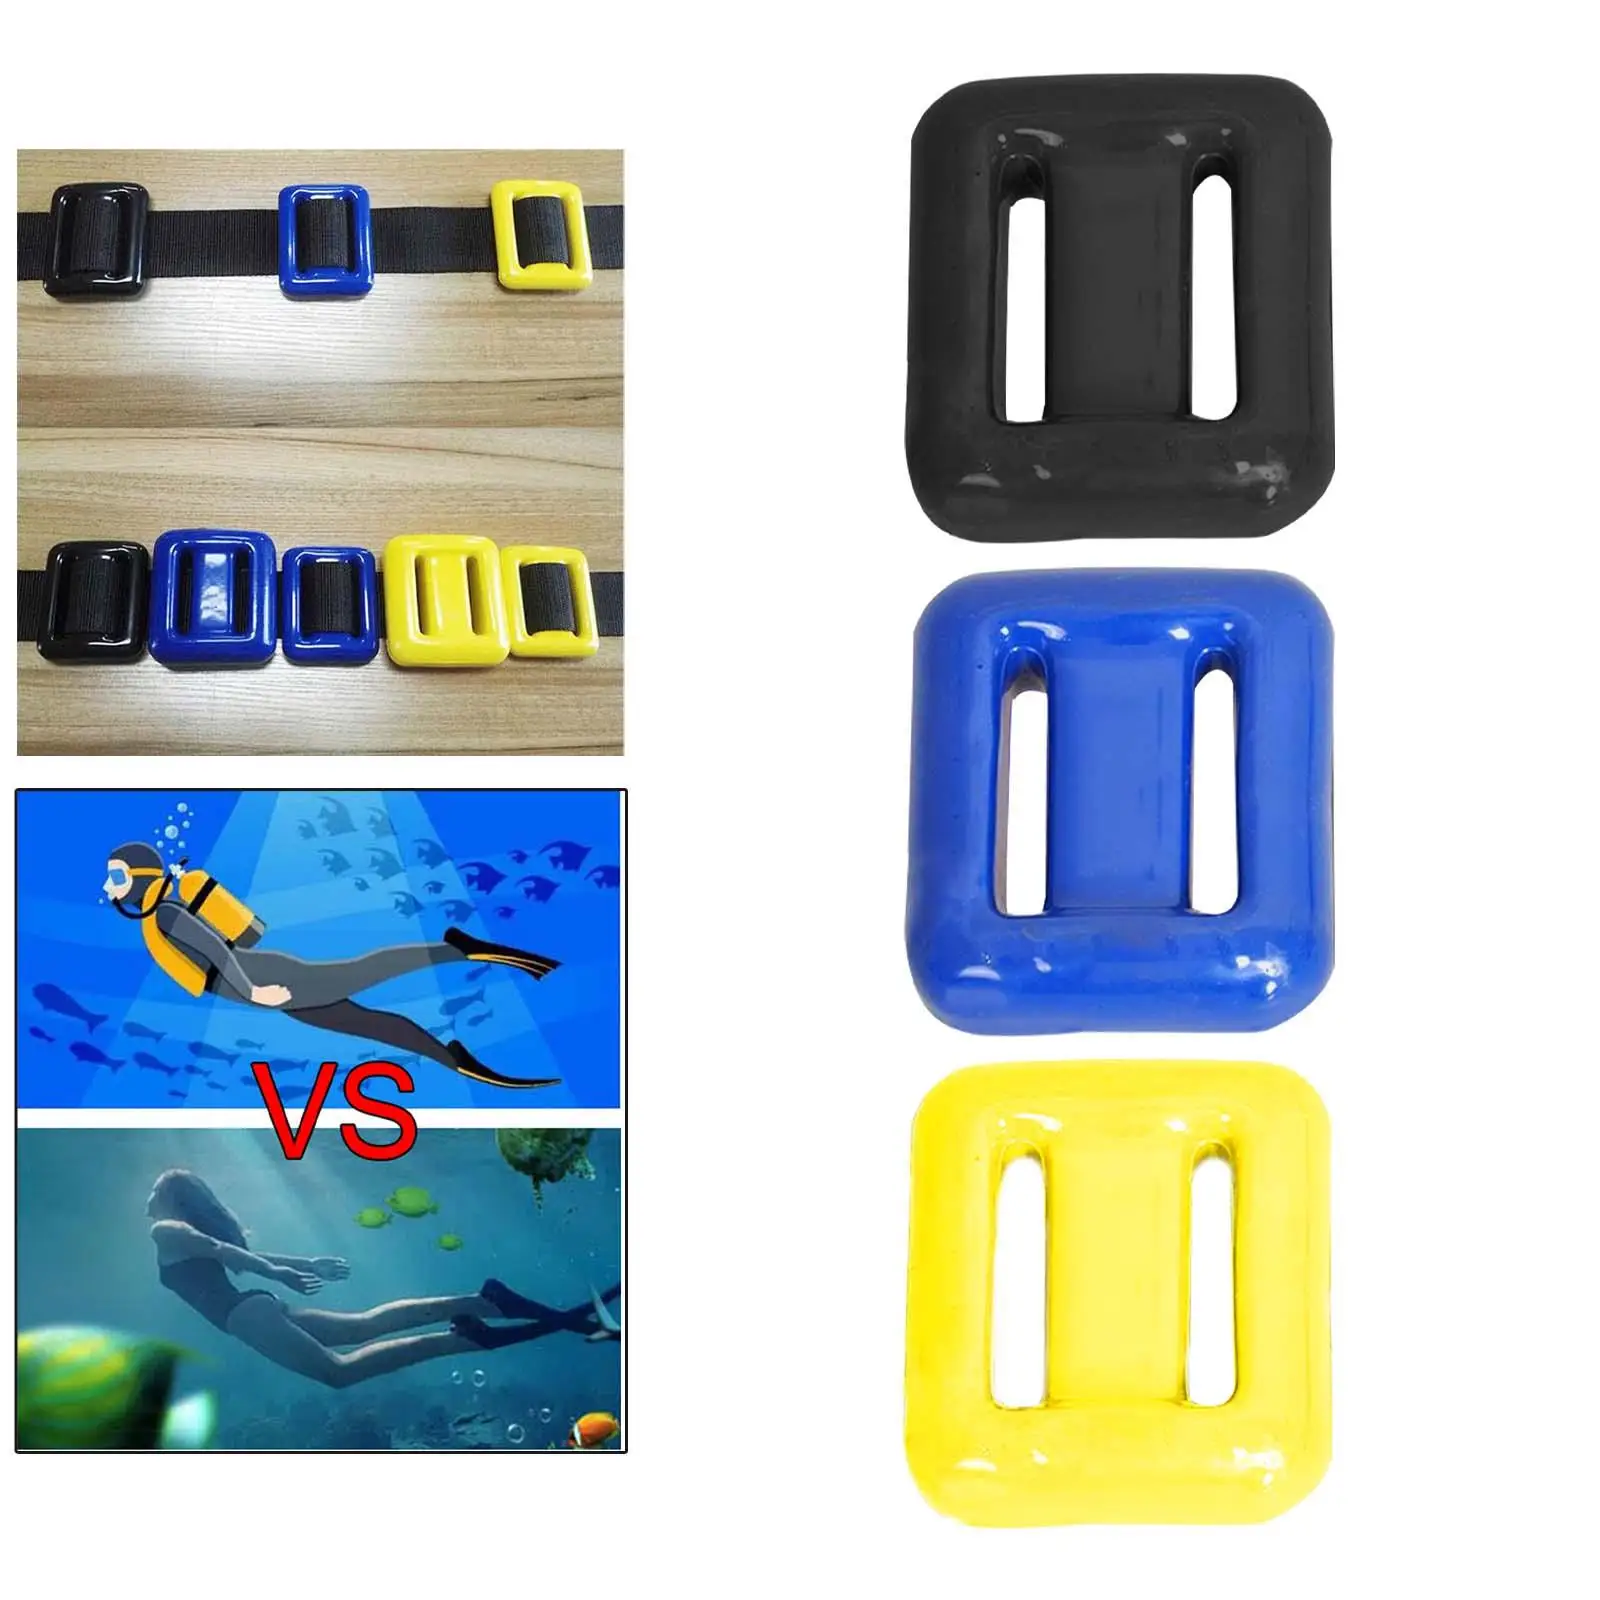 1000G Diving Weight Scuba Weights Dive Gear Counterweight Accessories for Snorkeling Sport Equipment Surfing Swimming